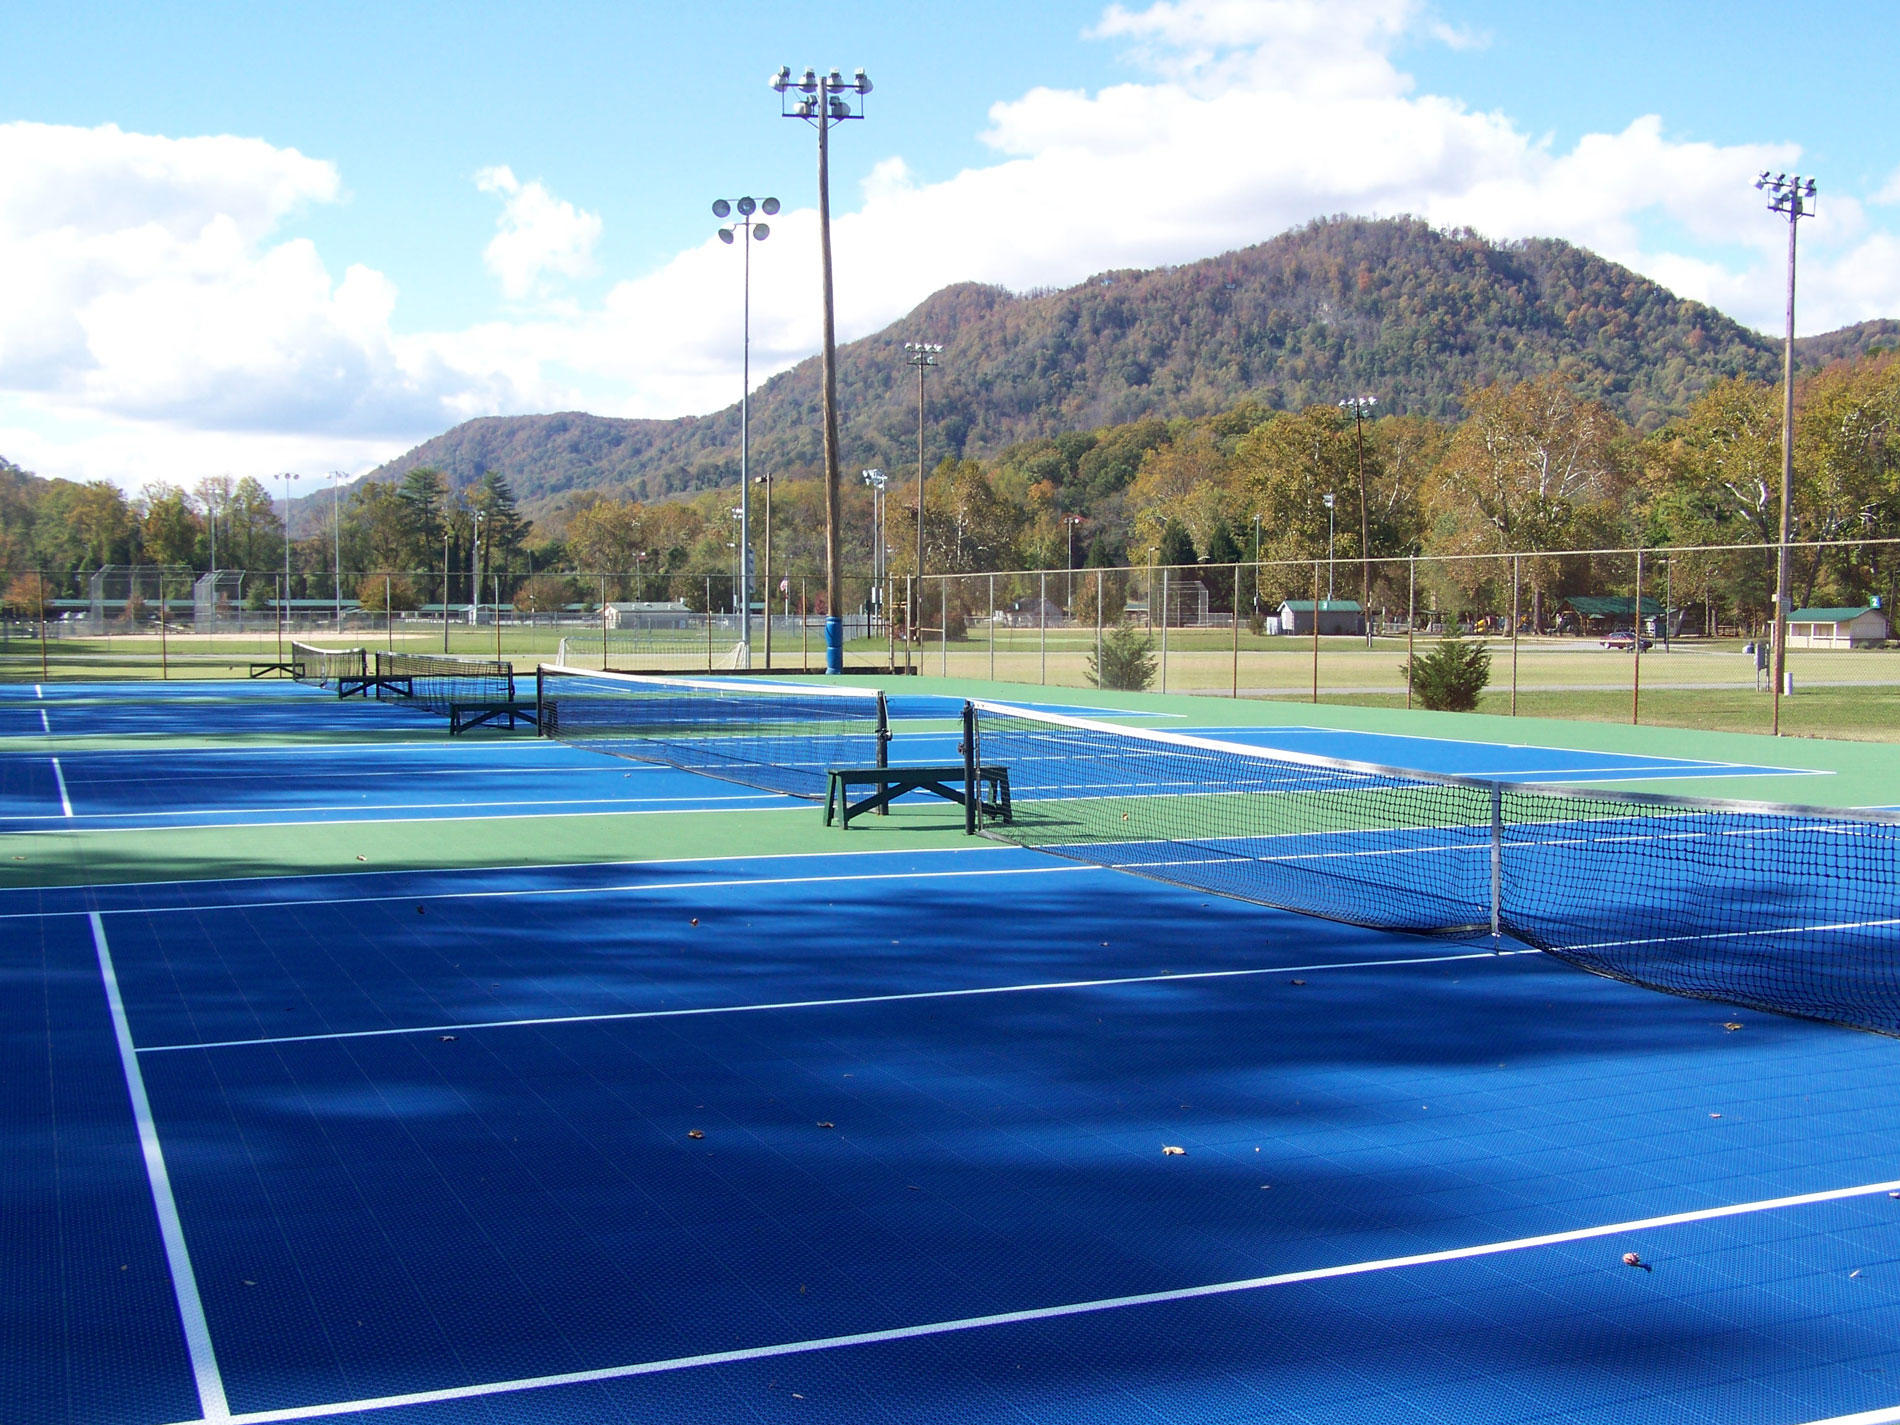 Floxcourt outdoor court with a small mountain in the background